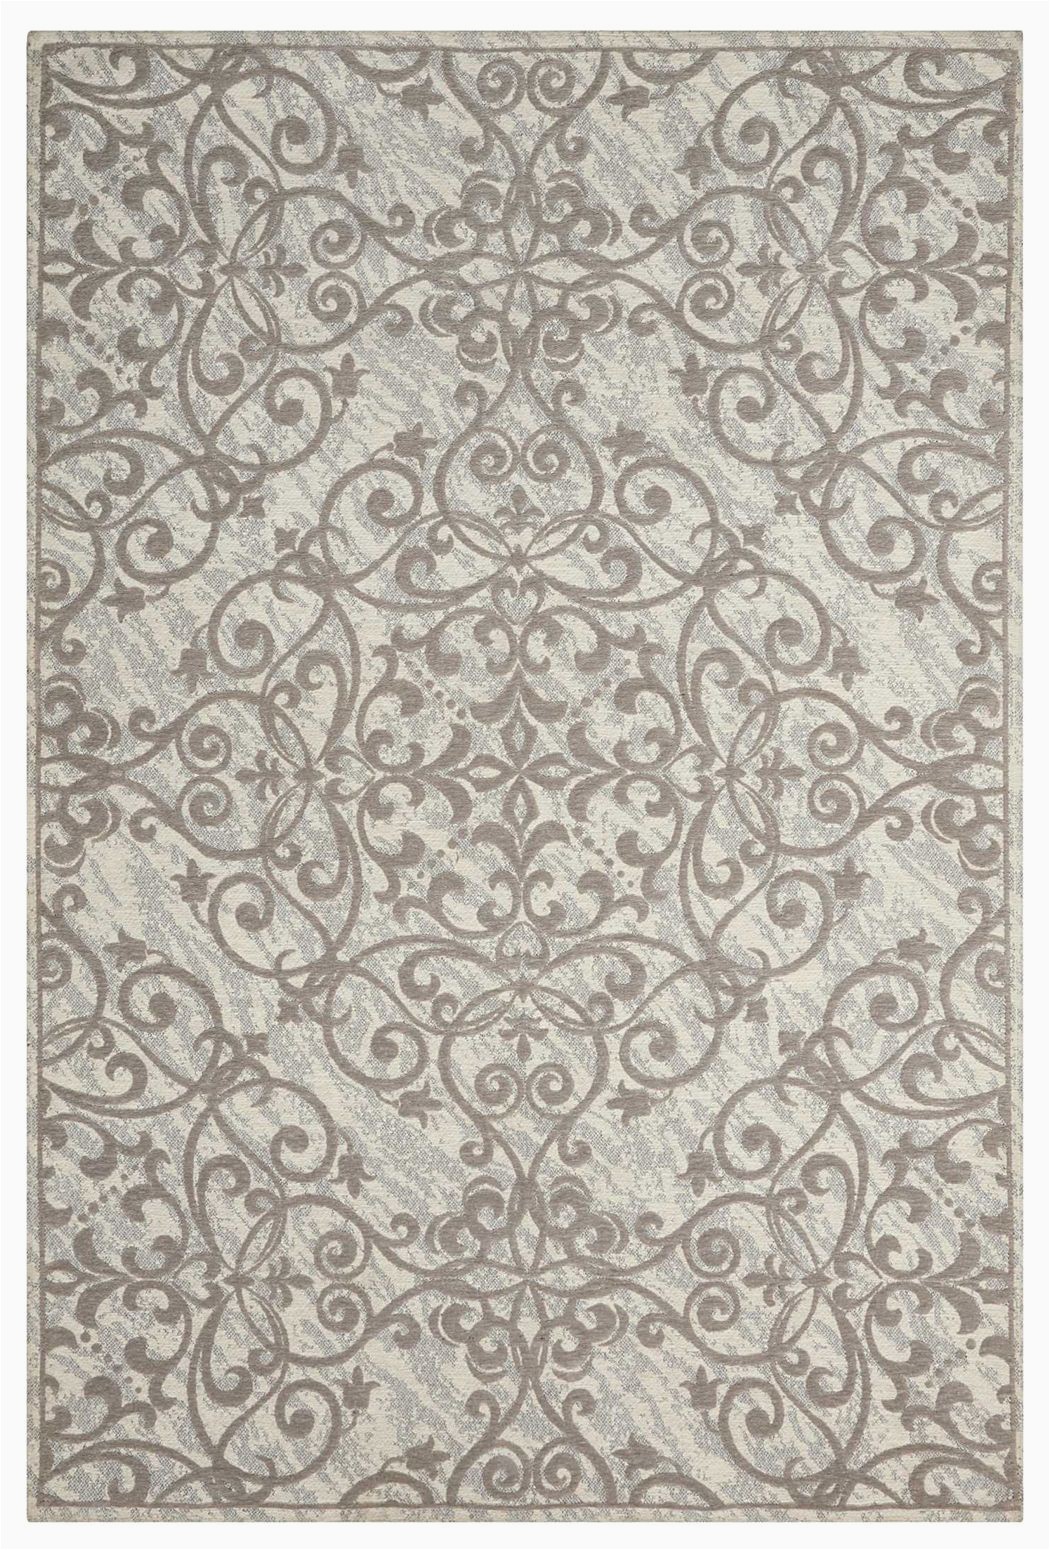 Ashley Furniture 8×10 area Rugs Home Accents Damask 8 X 10 Rug Gray Ivory